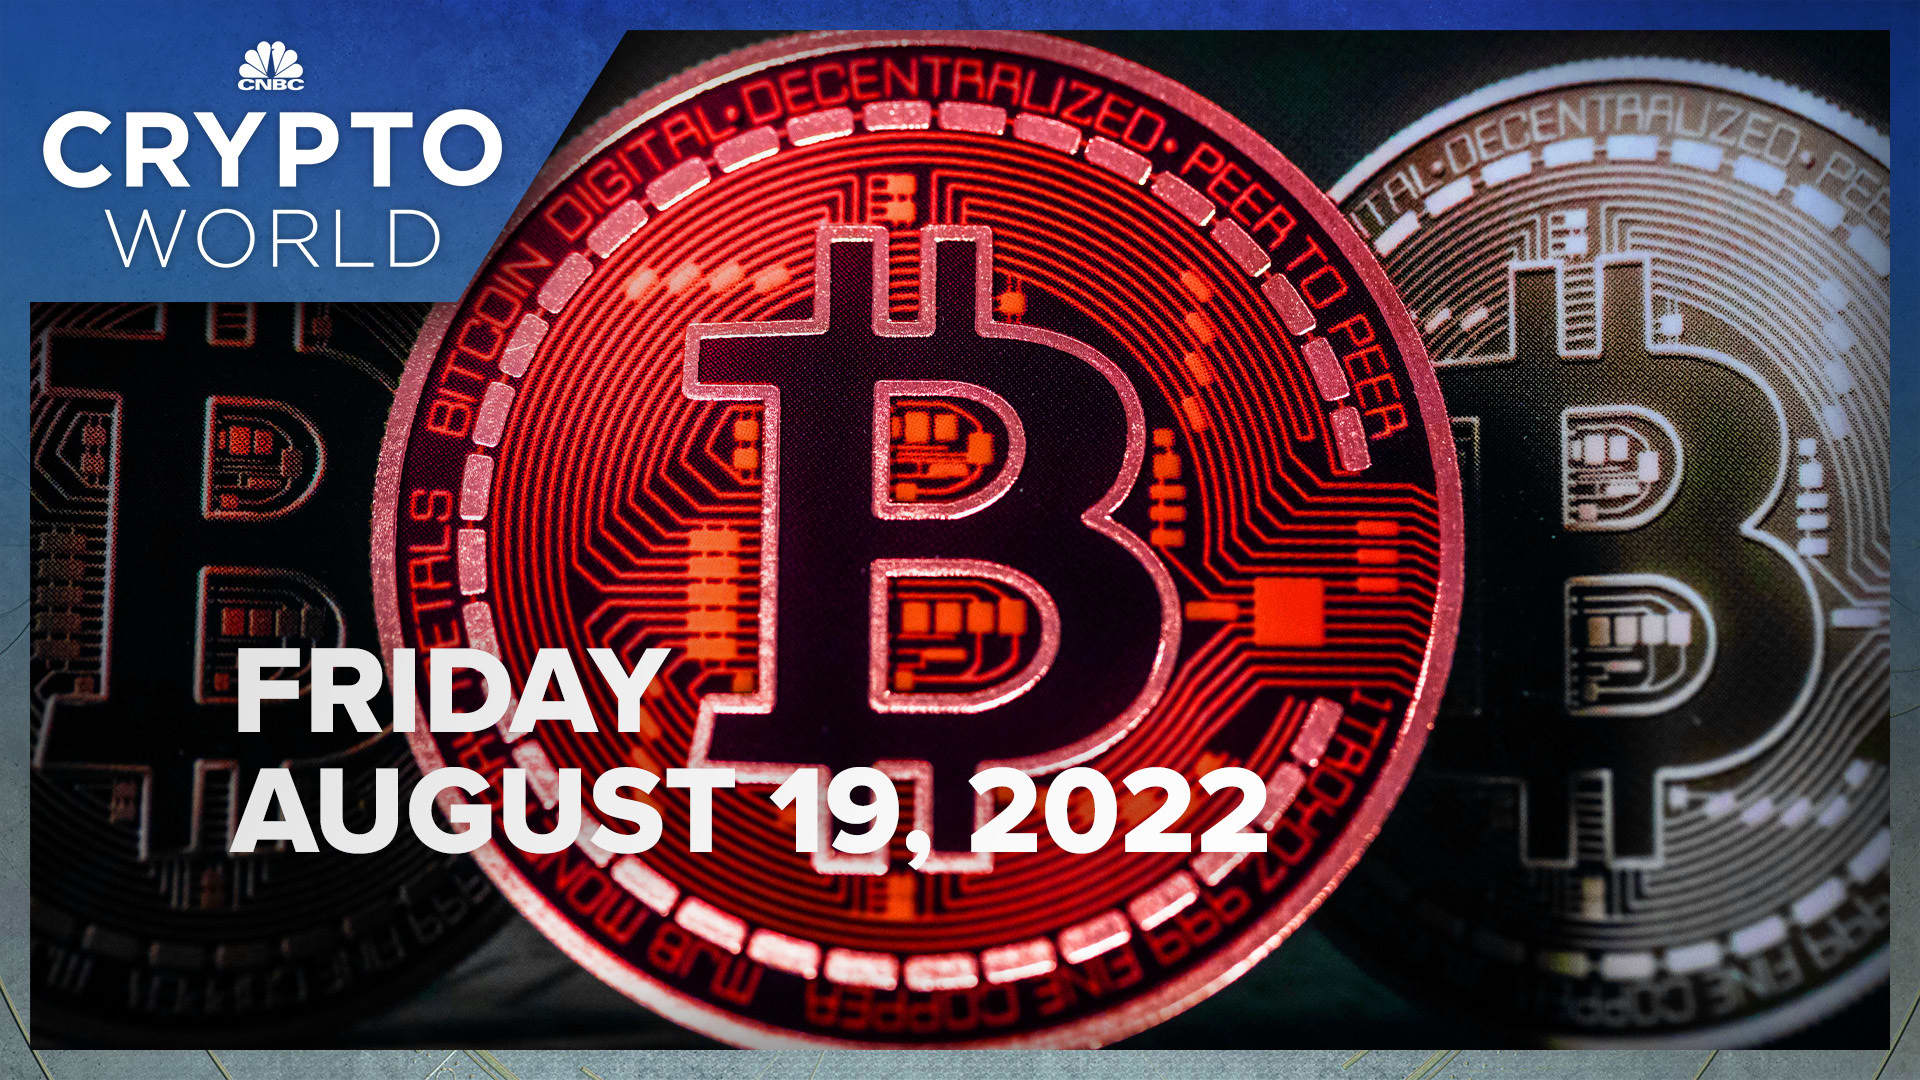 bitcoin-plunges-to-usd21-000-u-s-asks-for-celsius-probe-and-hodlnaut-s-80-job-cuts-cnbc-crypto-world